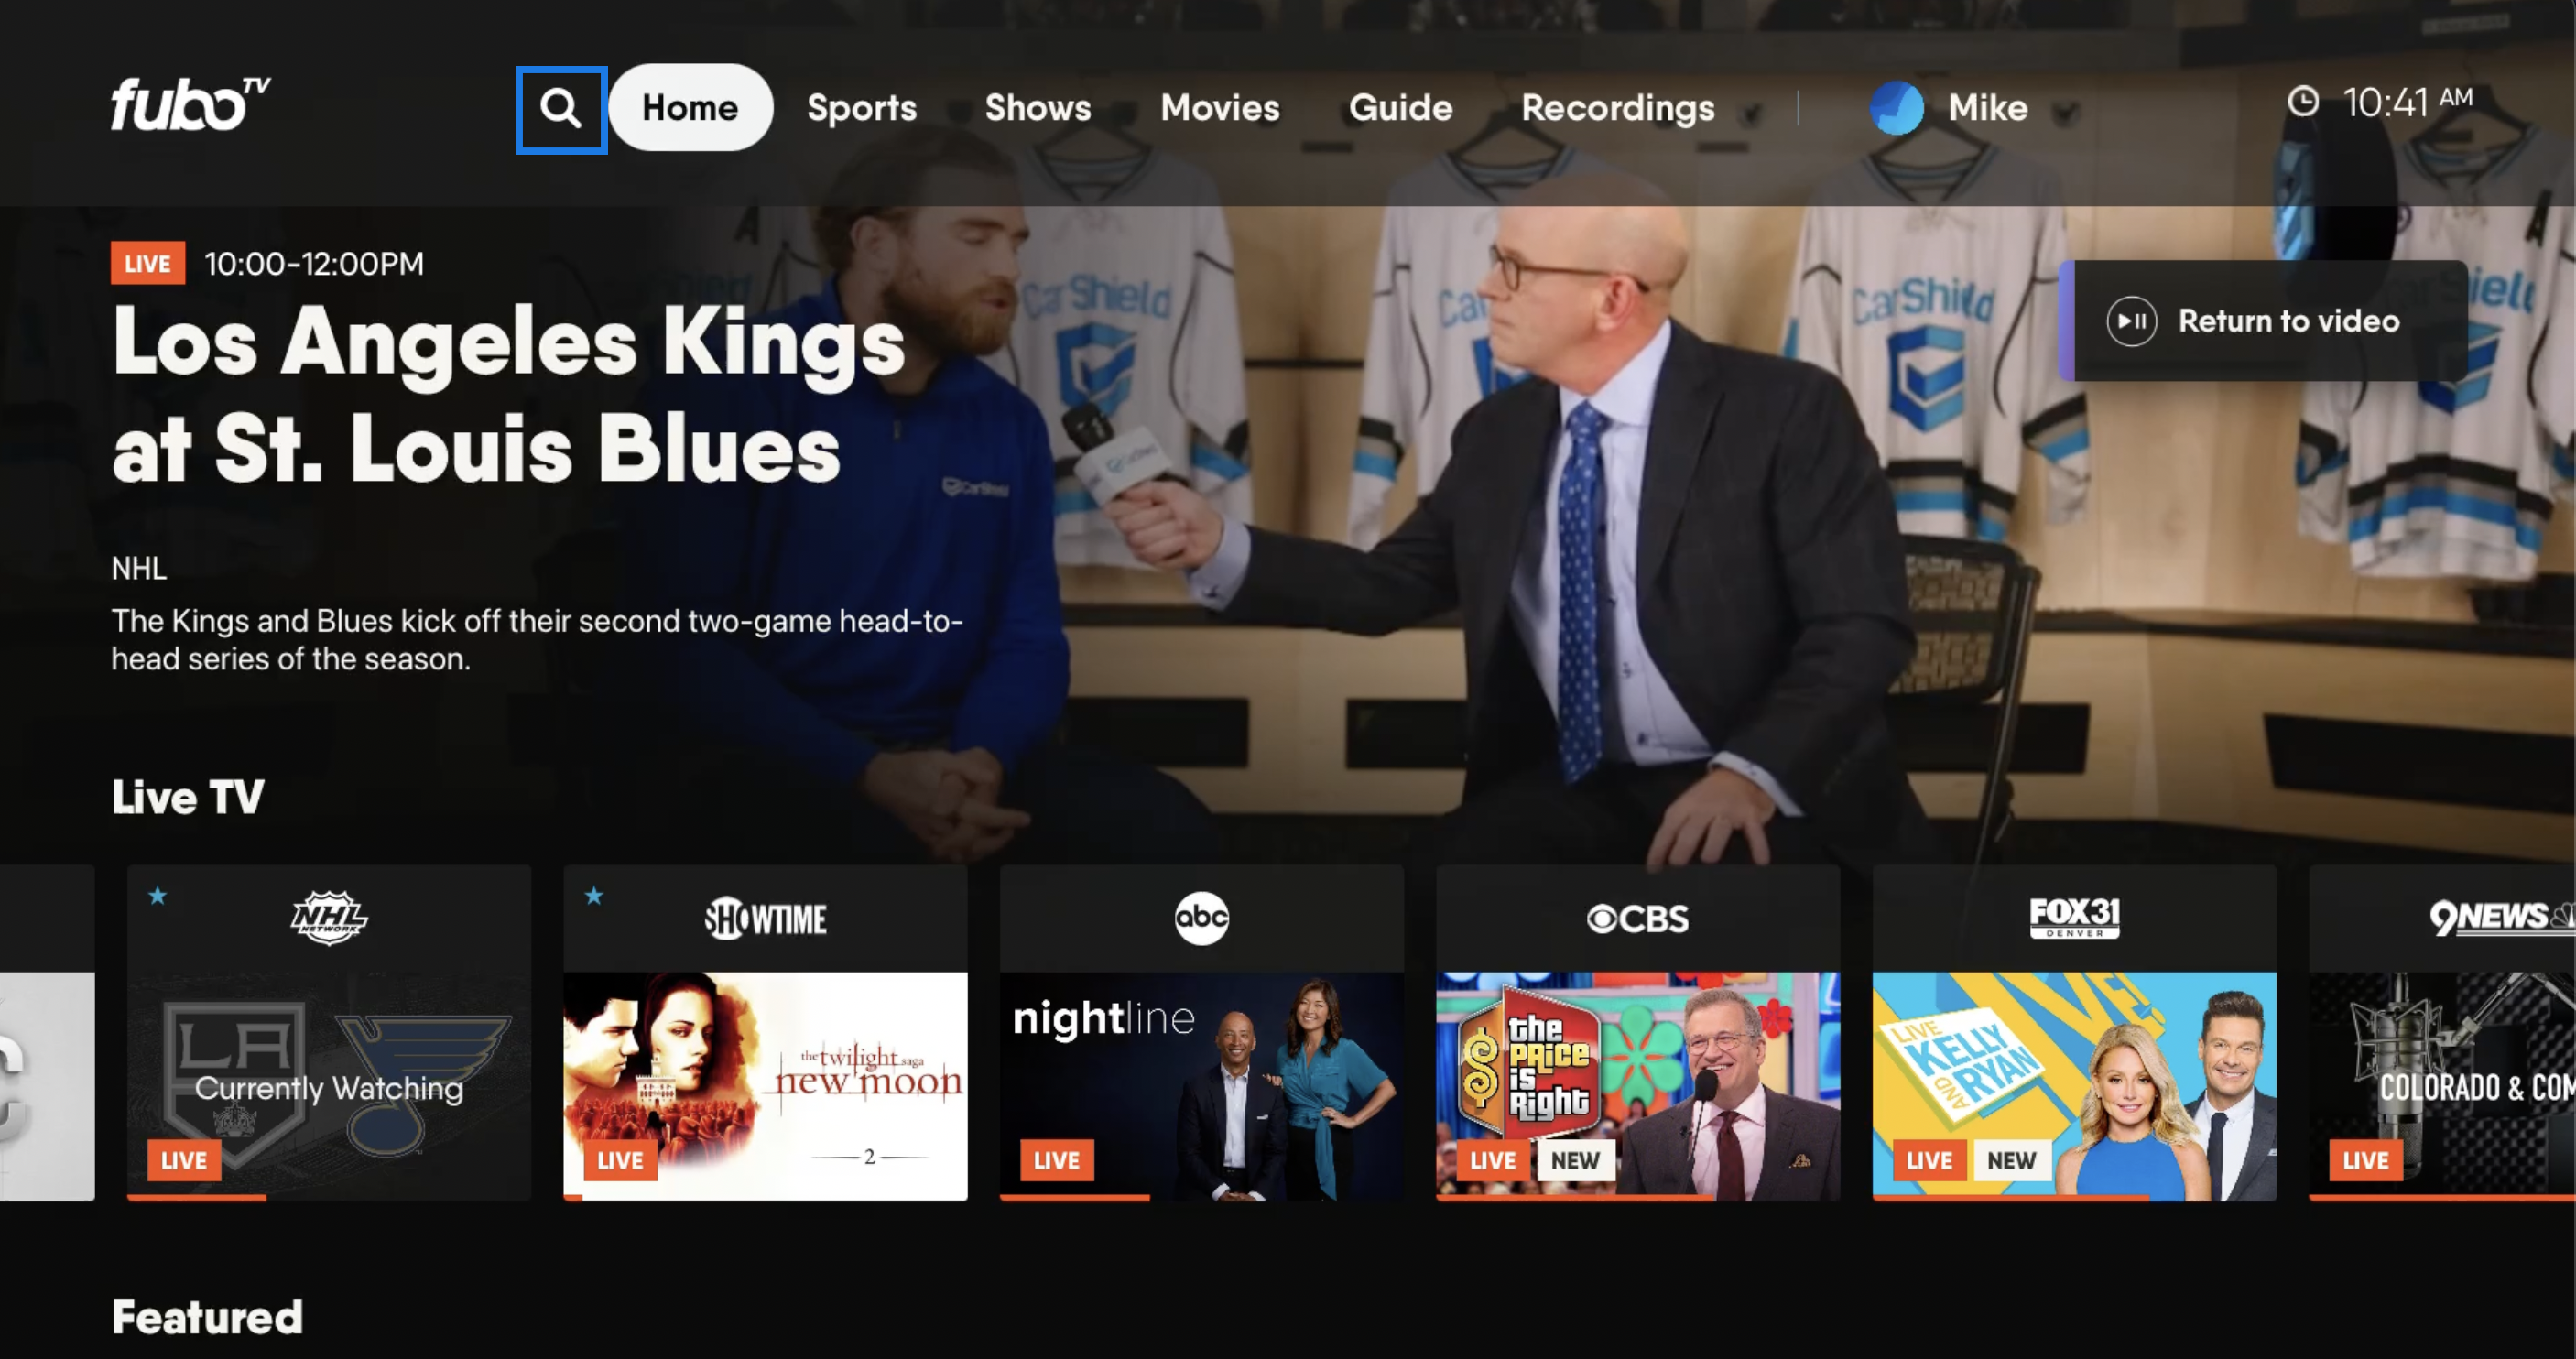 Home screen of the FuboTV app on Apple TV with search icon highlighted at top